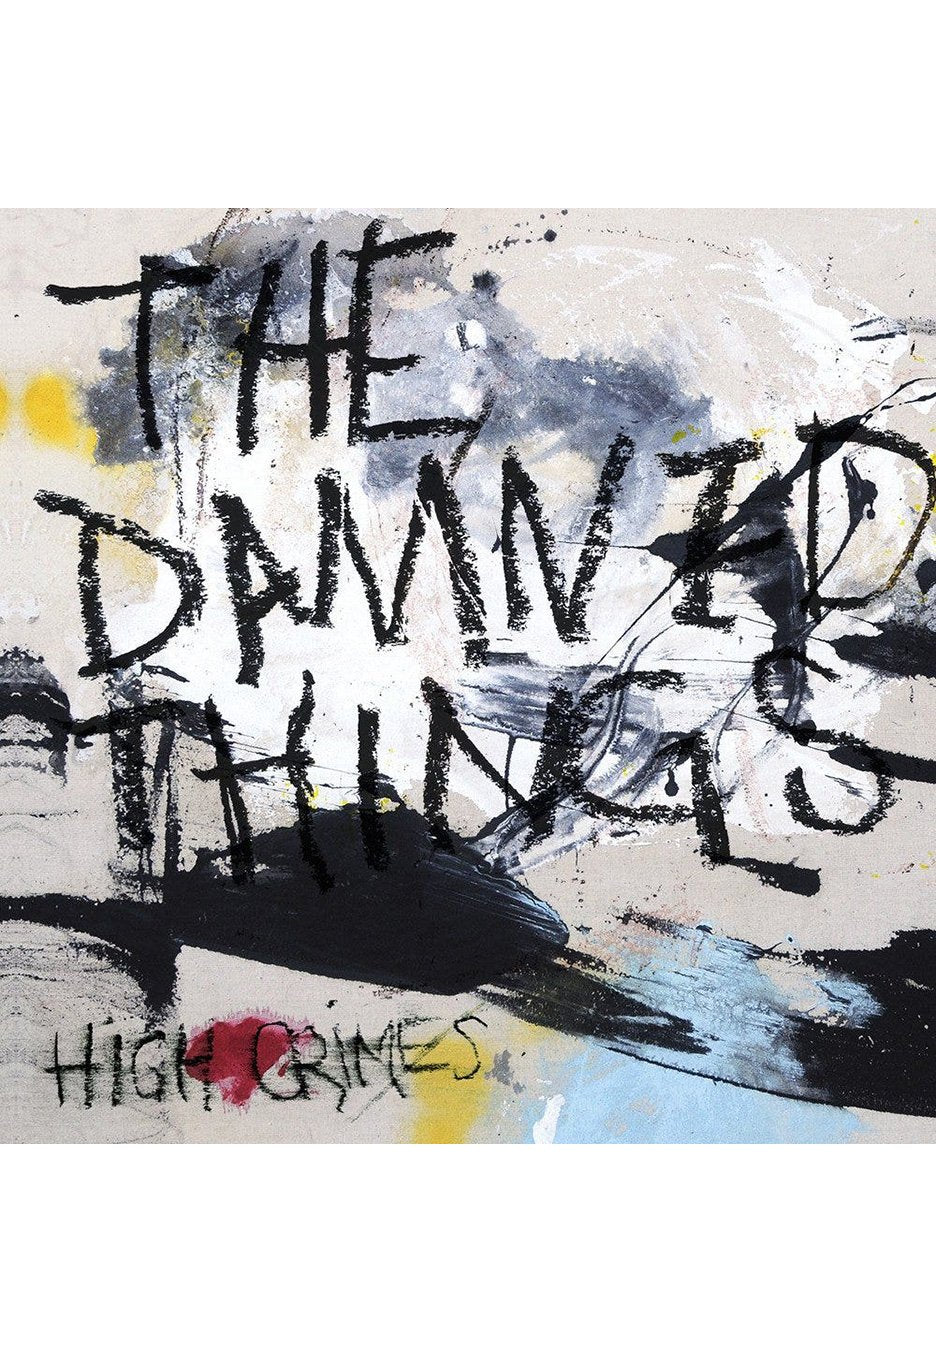 The Damned Things - High Crimes Ltd. Yellow - Colored Vinyl